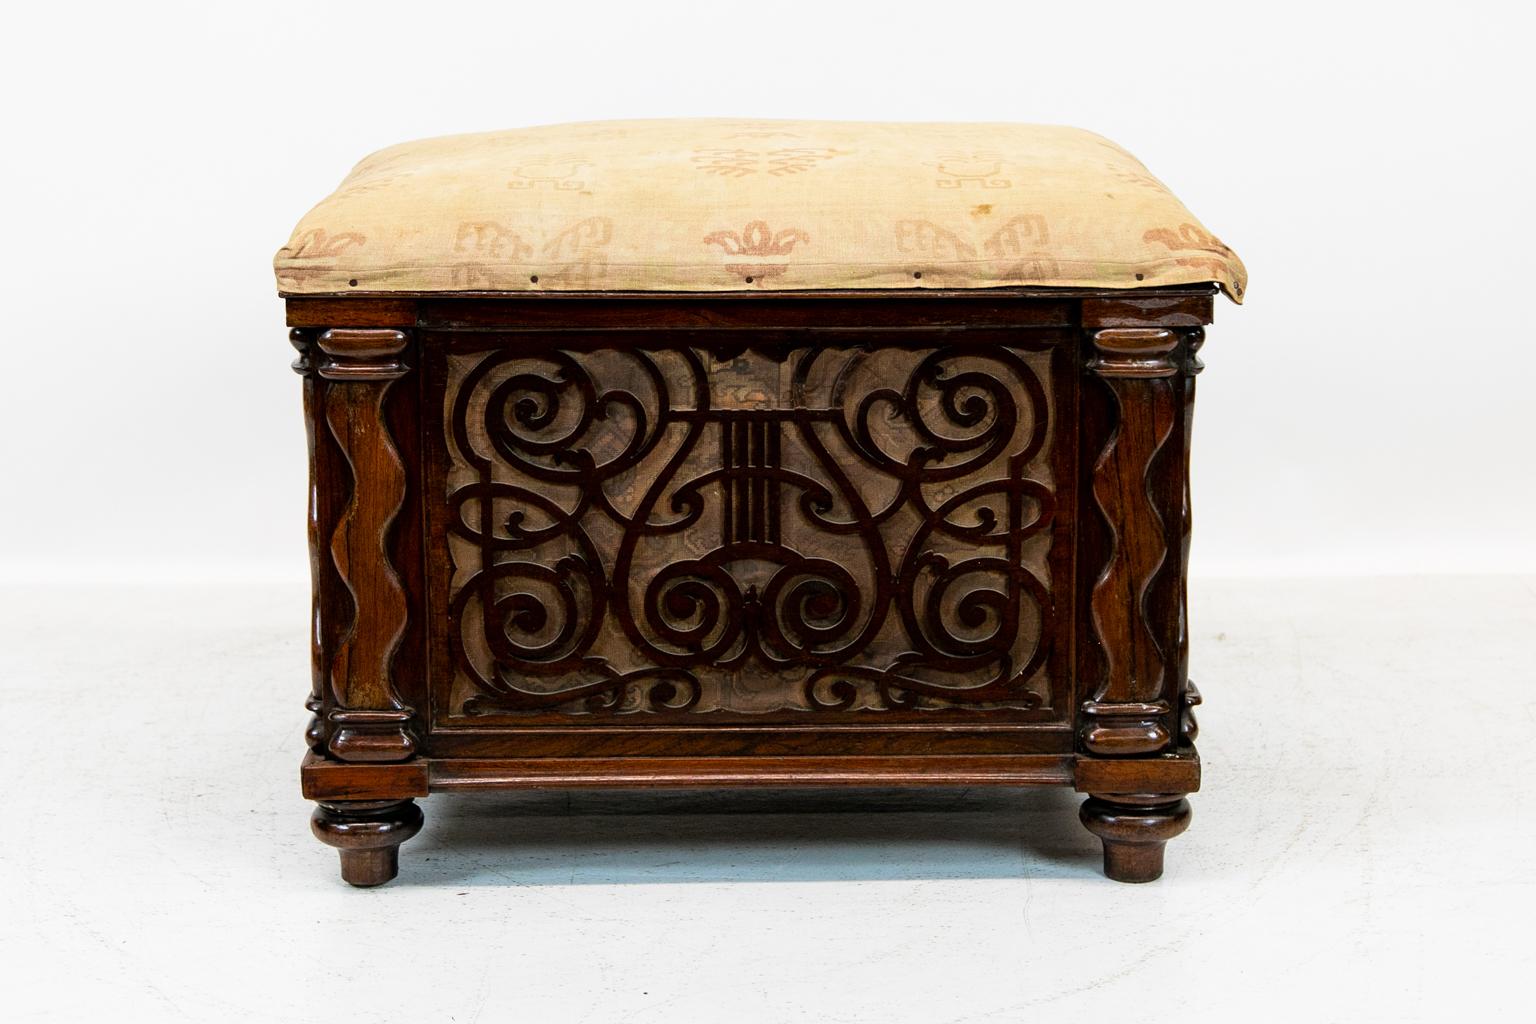 English solid rosewood barley twist stool, has reticulated carved lyre framed with beaded rosewood with a paper background. It rests on original bun feet and brass castors. The damask fabric has discoloration, wear, and a 1.75 tear.